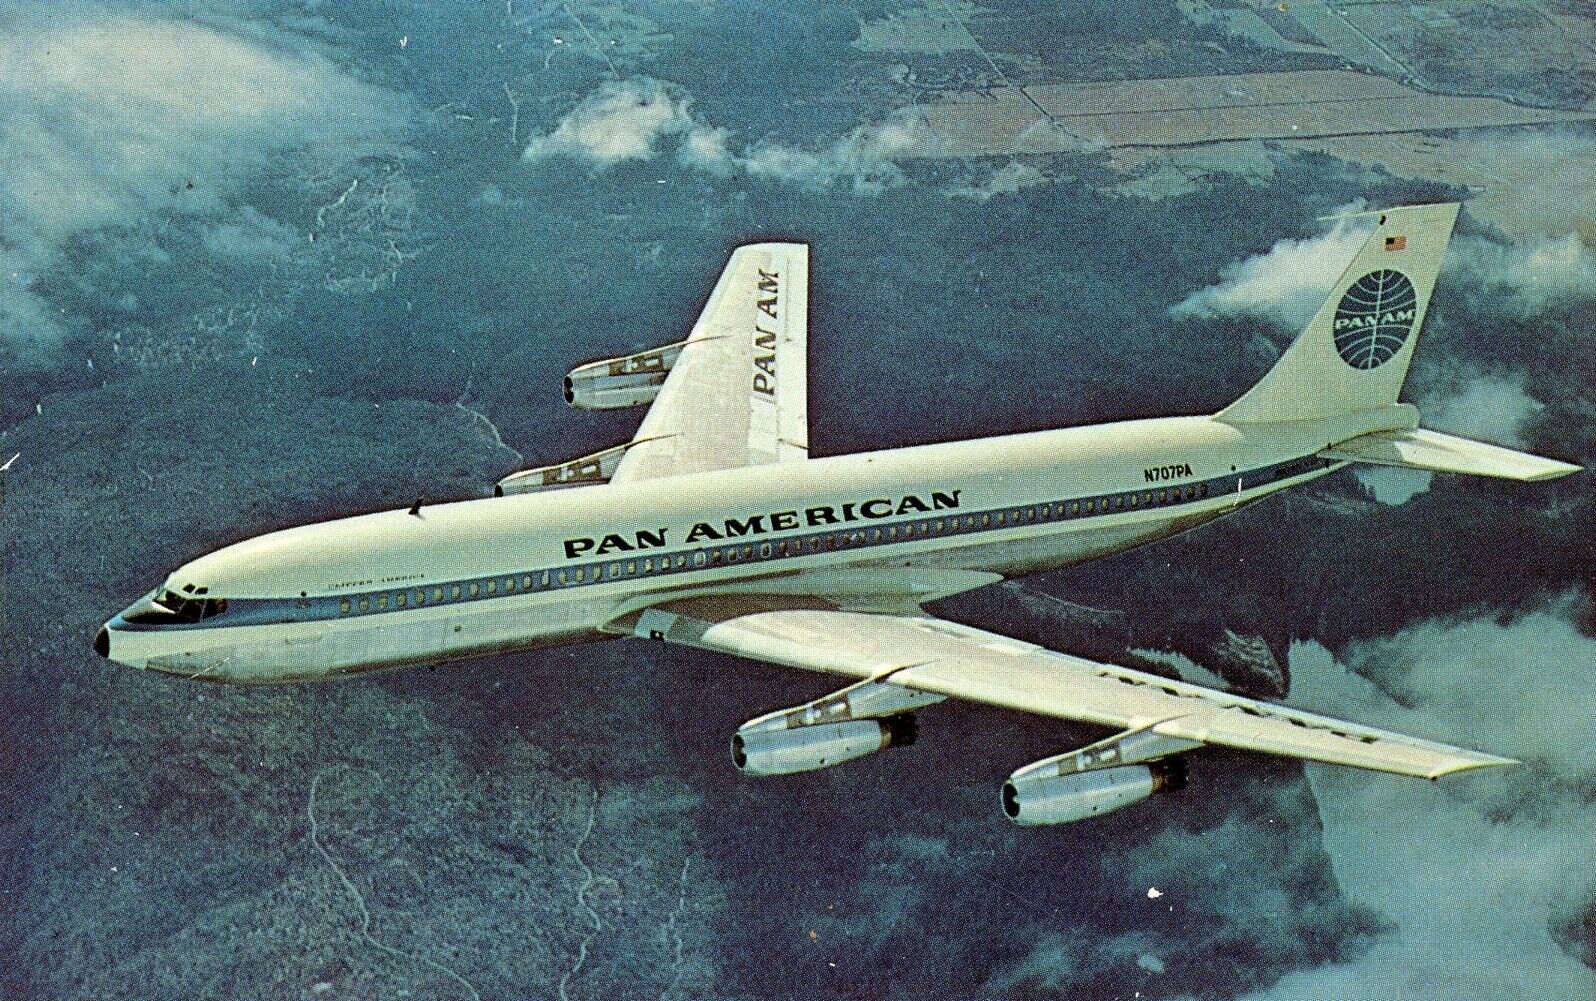 PAN AM / PAN AMERICAN  AIRLINES  B-707  AIRPORT / AIRCRAFT  # 6  BACKS DEFFERENT